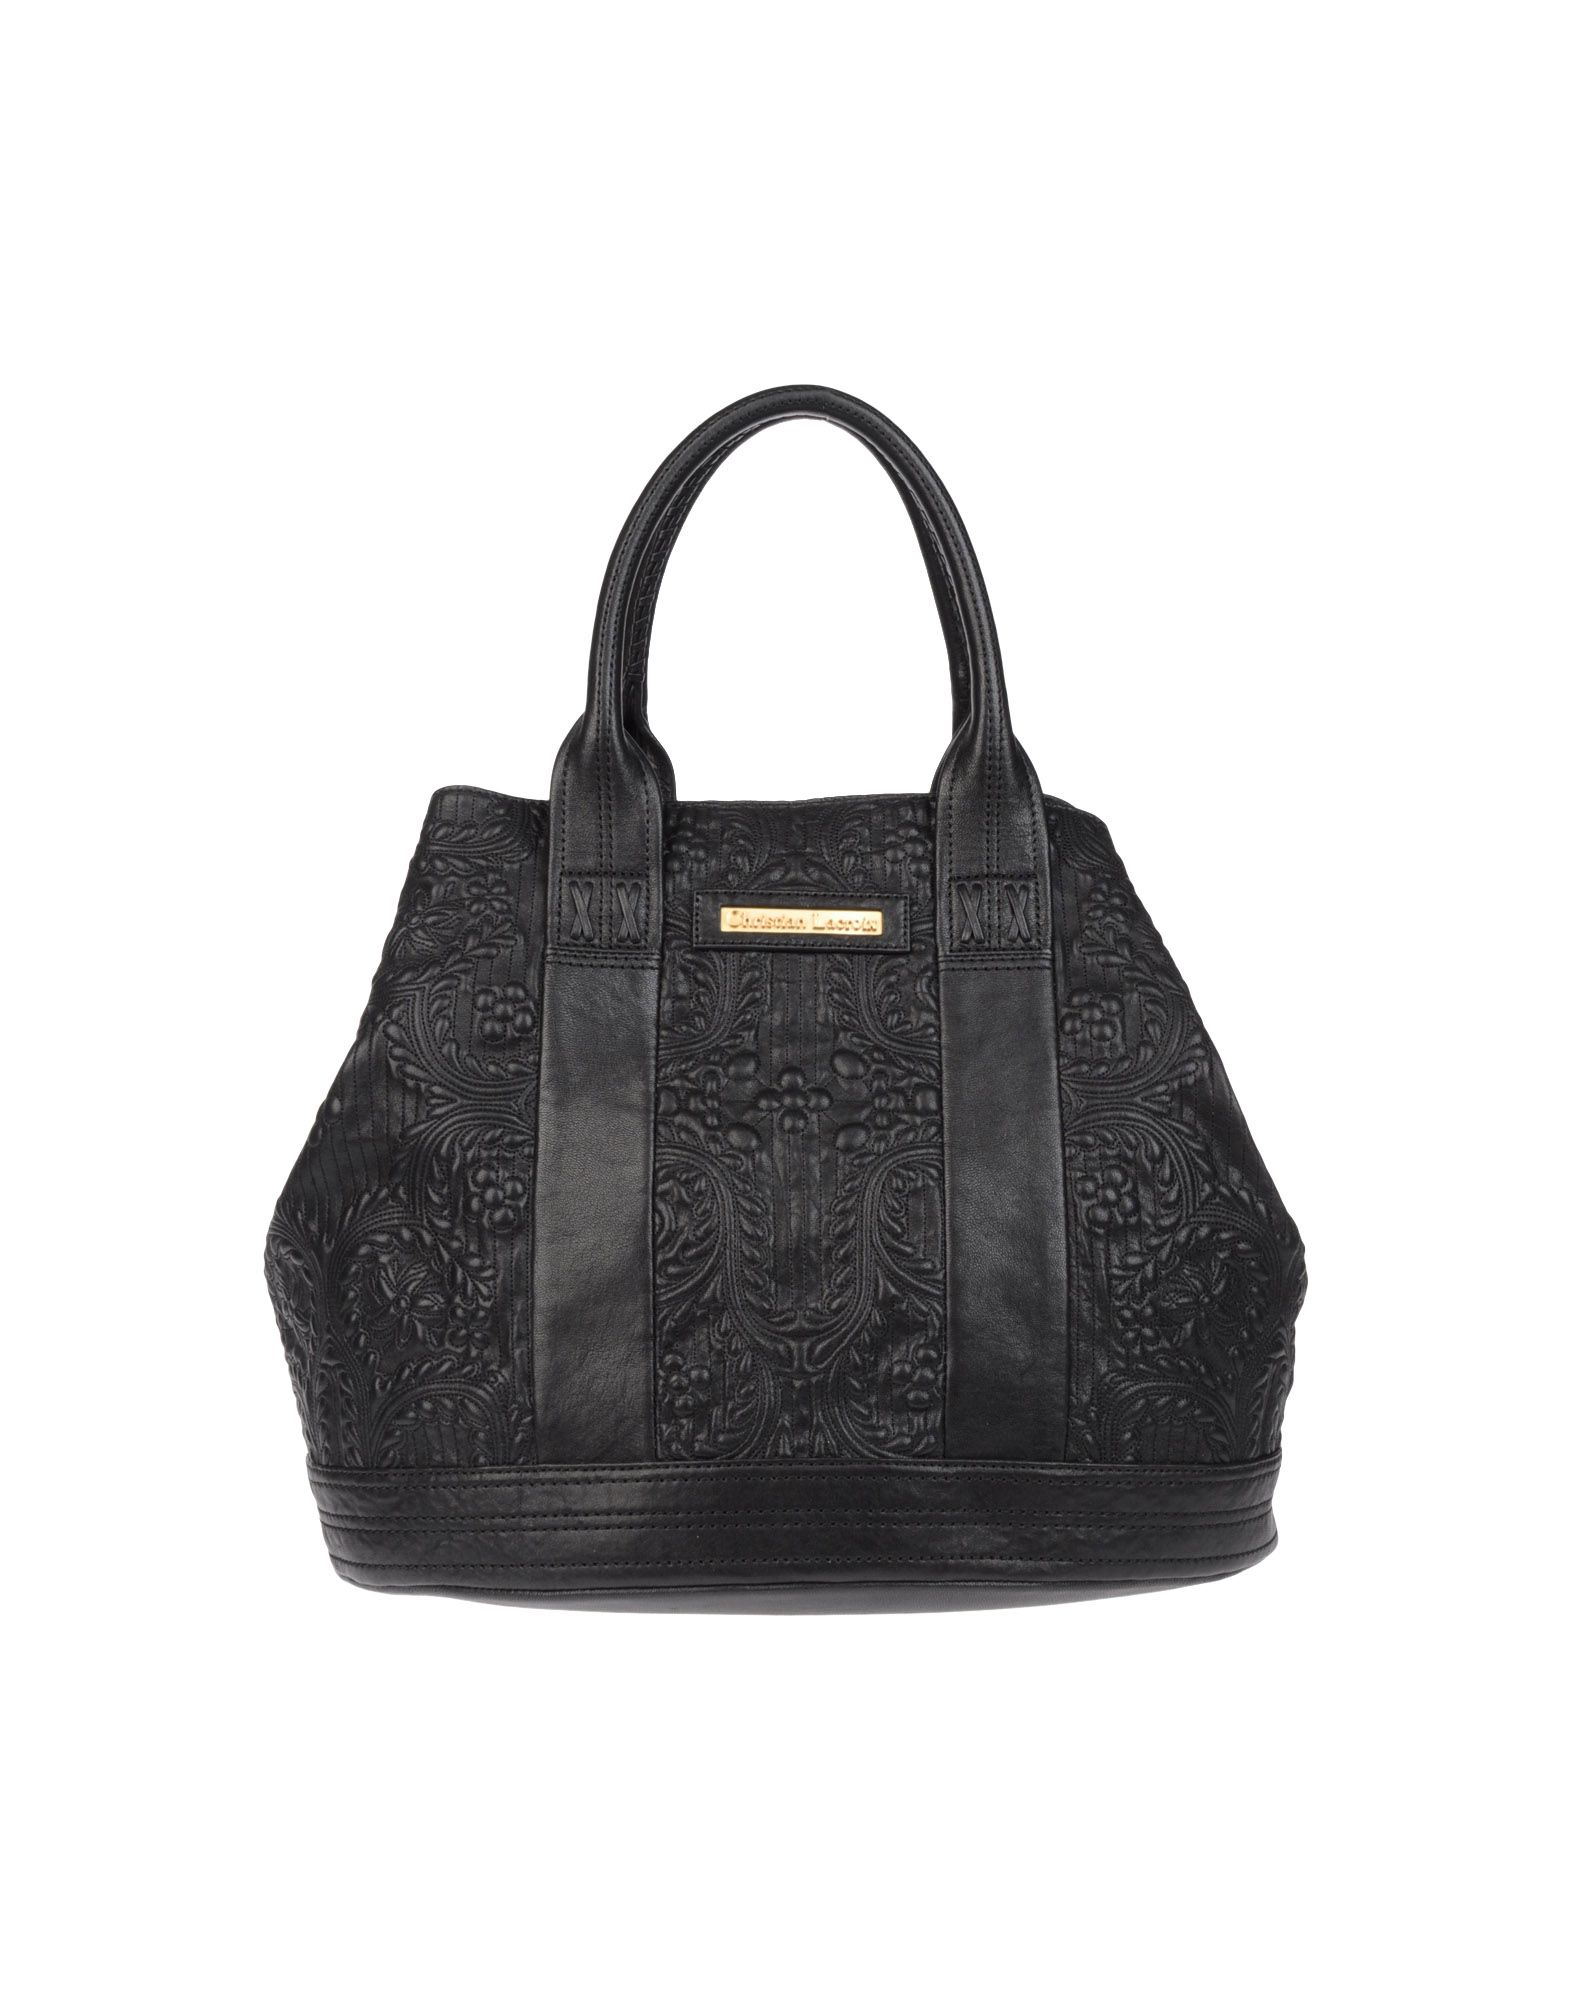 Christian Lacroix Large Leather Bag in Black | Lyst